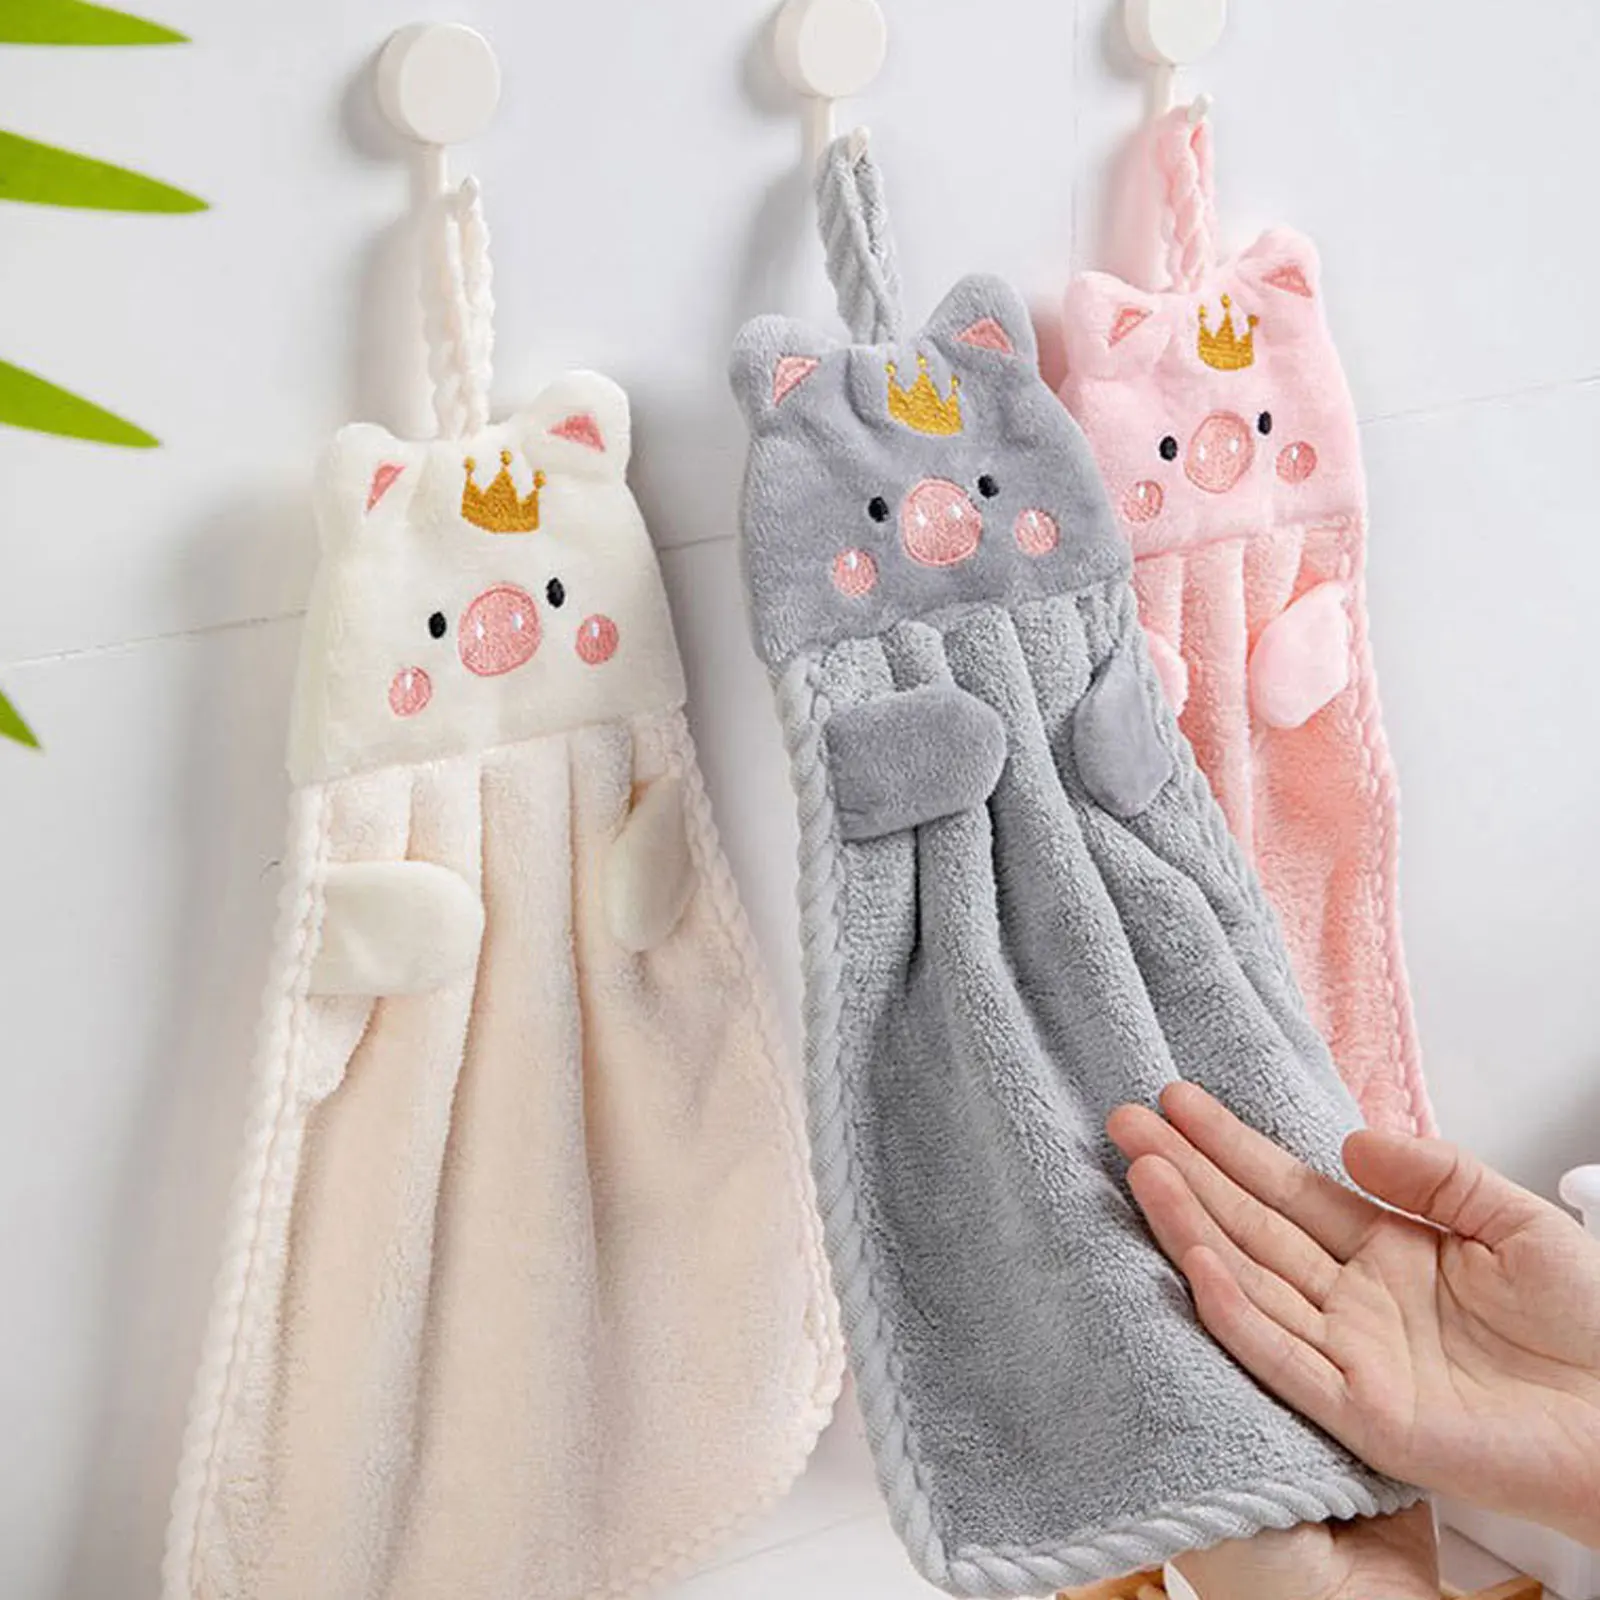 https://ae01.alicdn.com/kf/S506a7e8876a840e3a1da1c25cfaa850bQ/Cute-Pig-Hand-Towel-Household-Coral-Velvet-Terry-Towels-For-Bathroom-Kitchen-Soft-Hanging-Loops-Quick.jpg